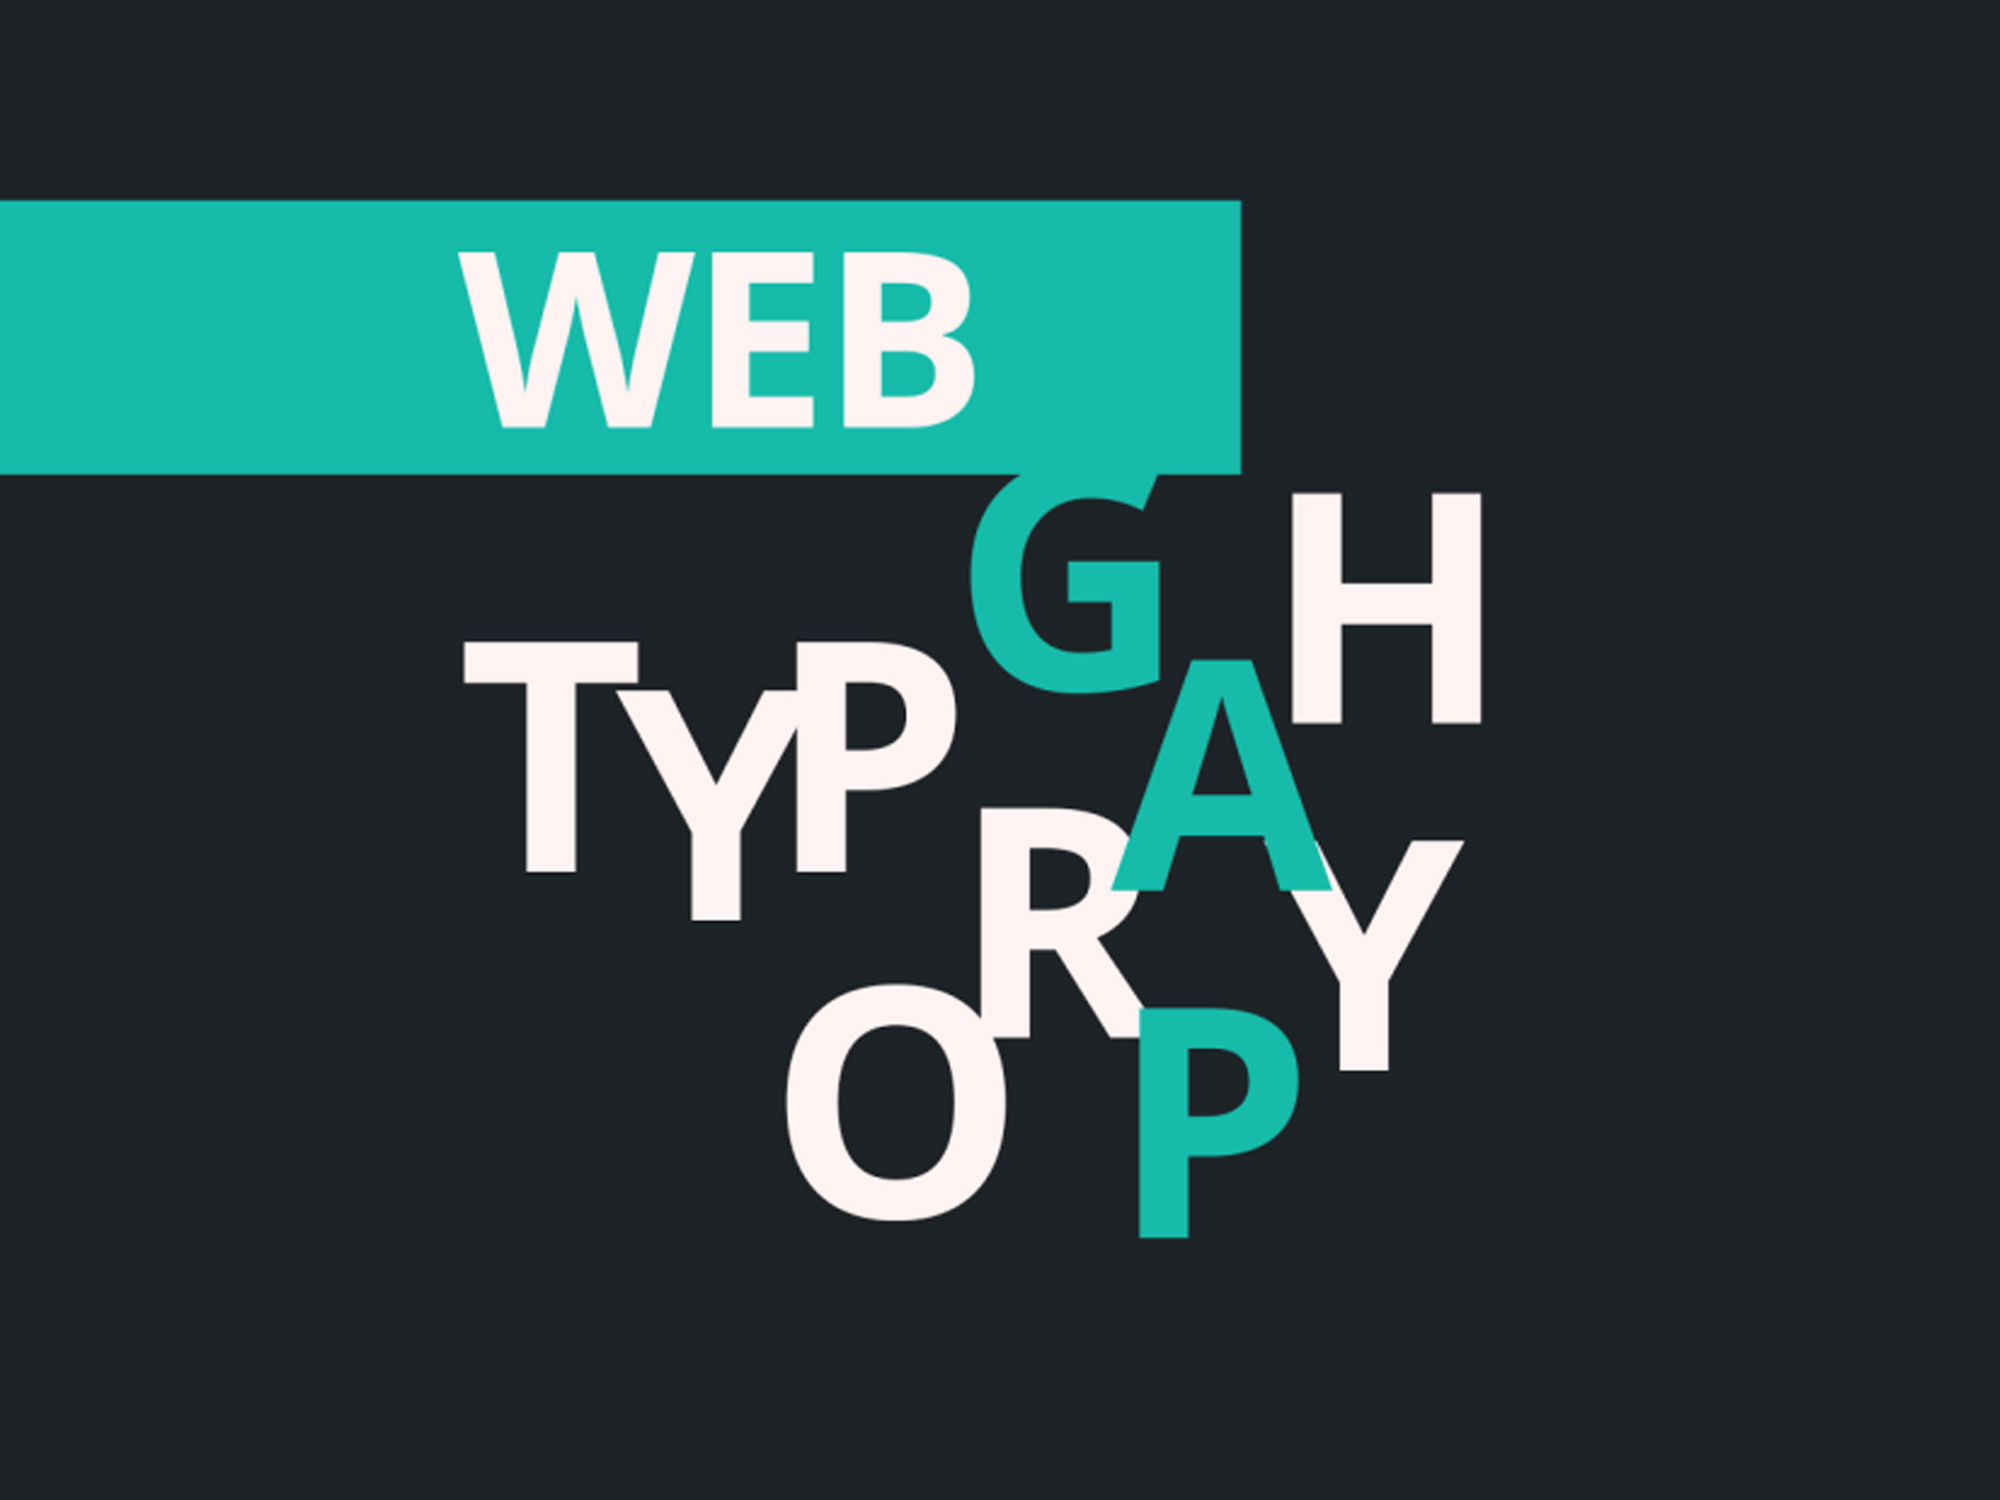 ứng dụng typography trong thiết kế website 1.jpg